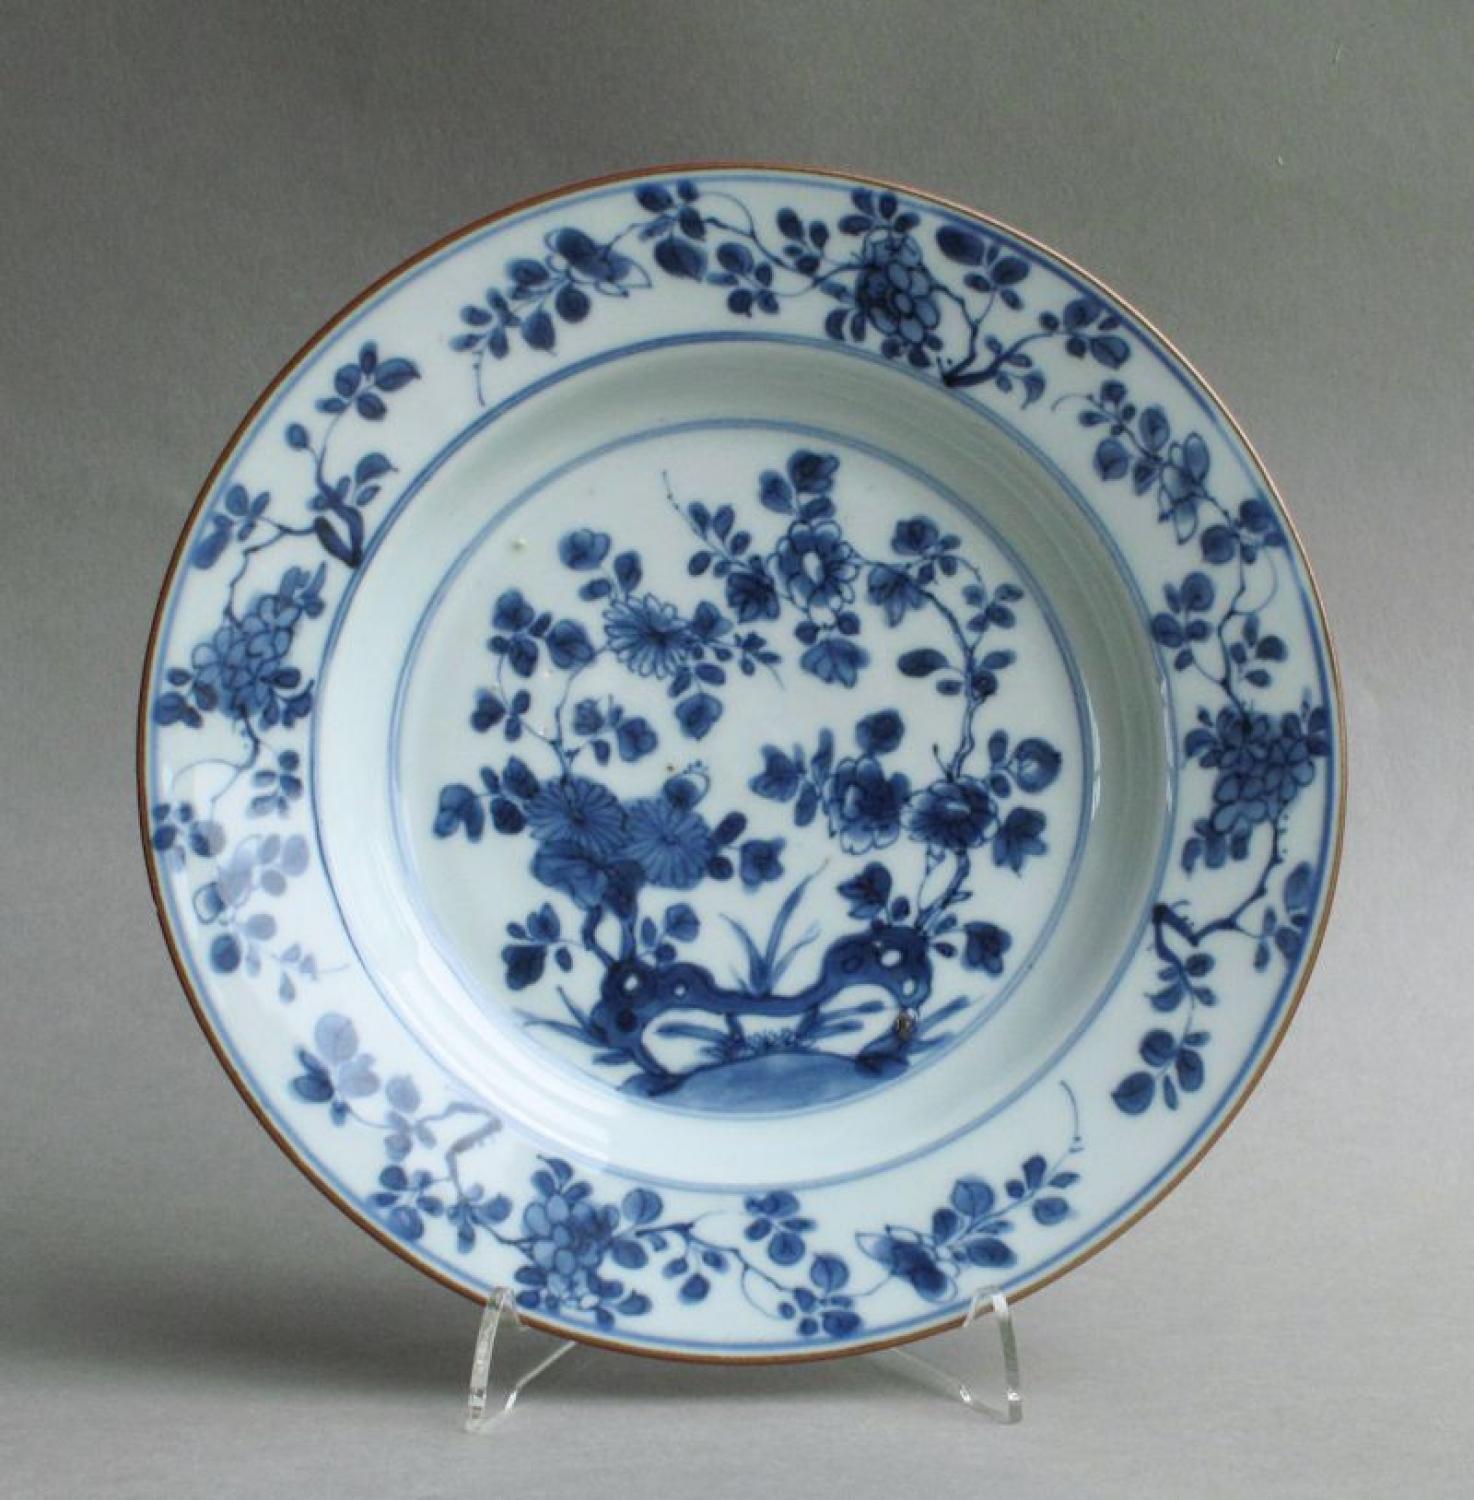 Chinese export floral plate, Yongzheng